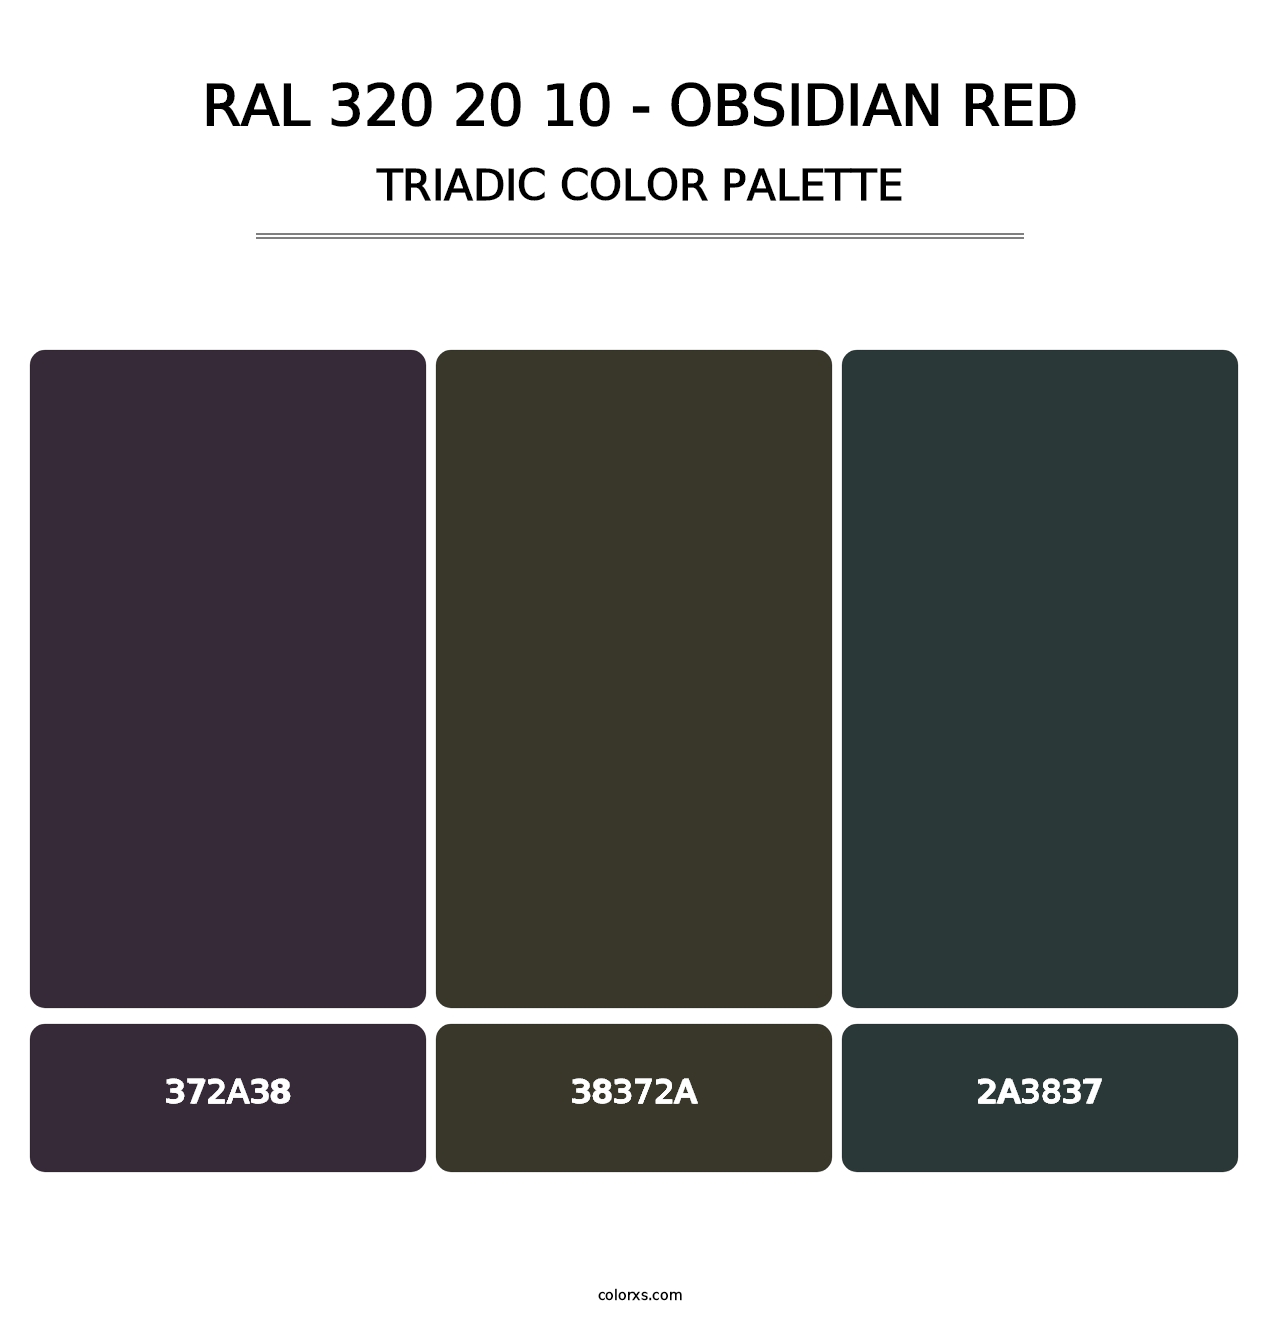 RAL 320 20 10 - Obsidian Red - Triadic Color Palette